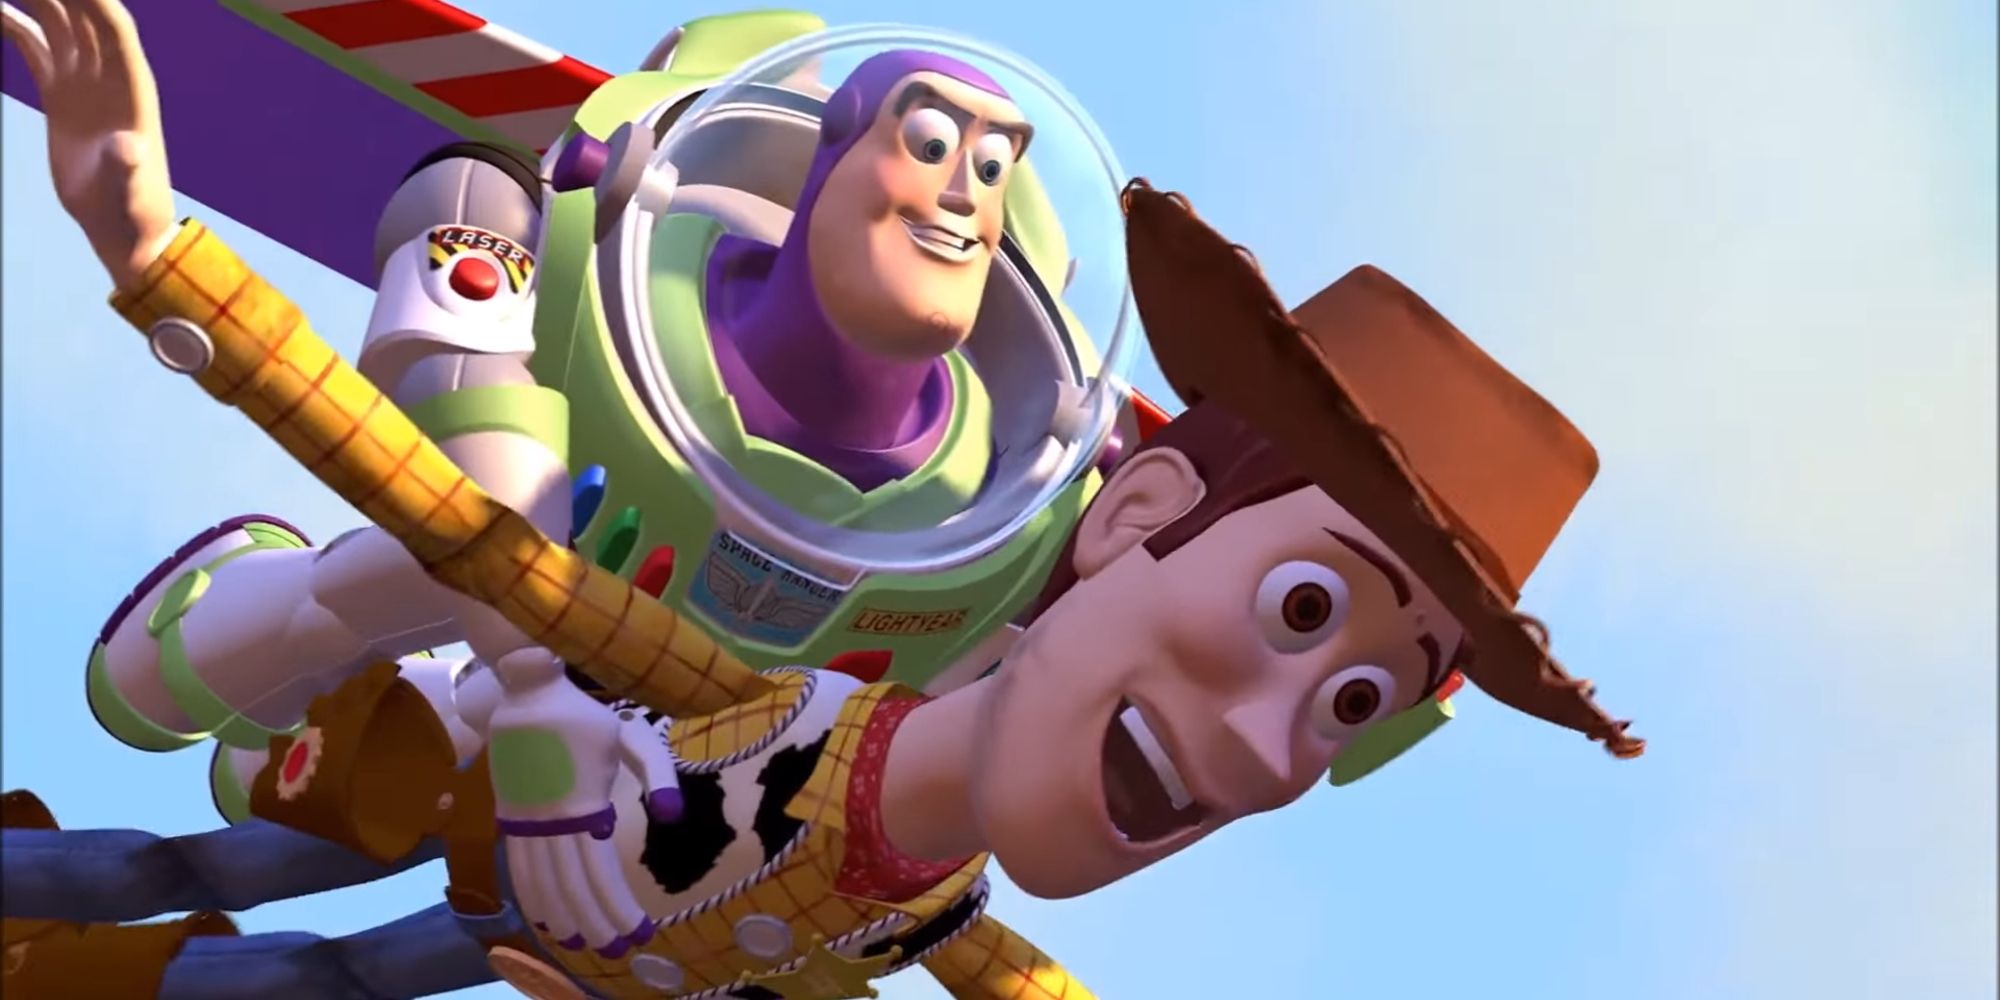 Woody and Buzz falling with style in Toy Story (1995)